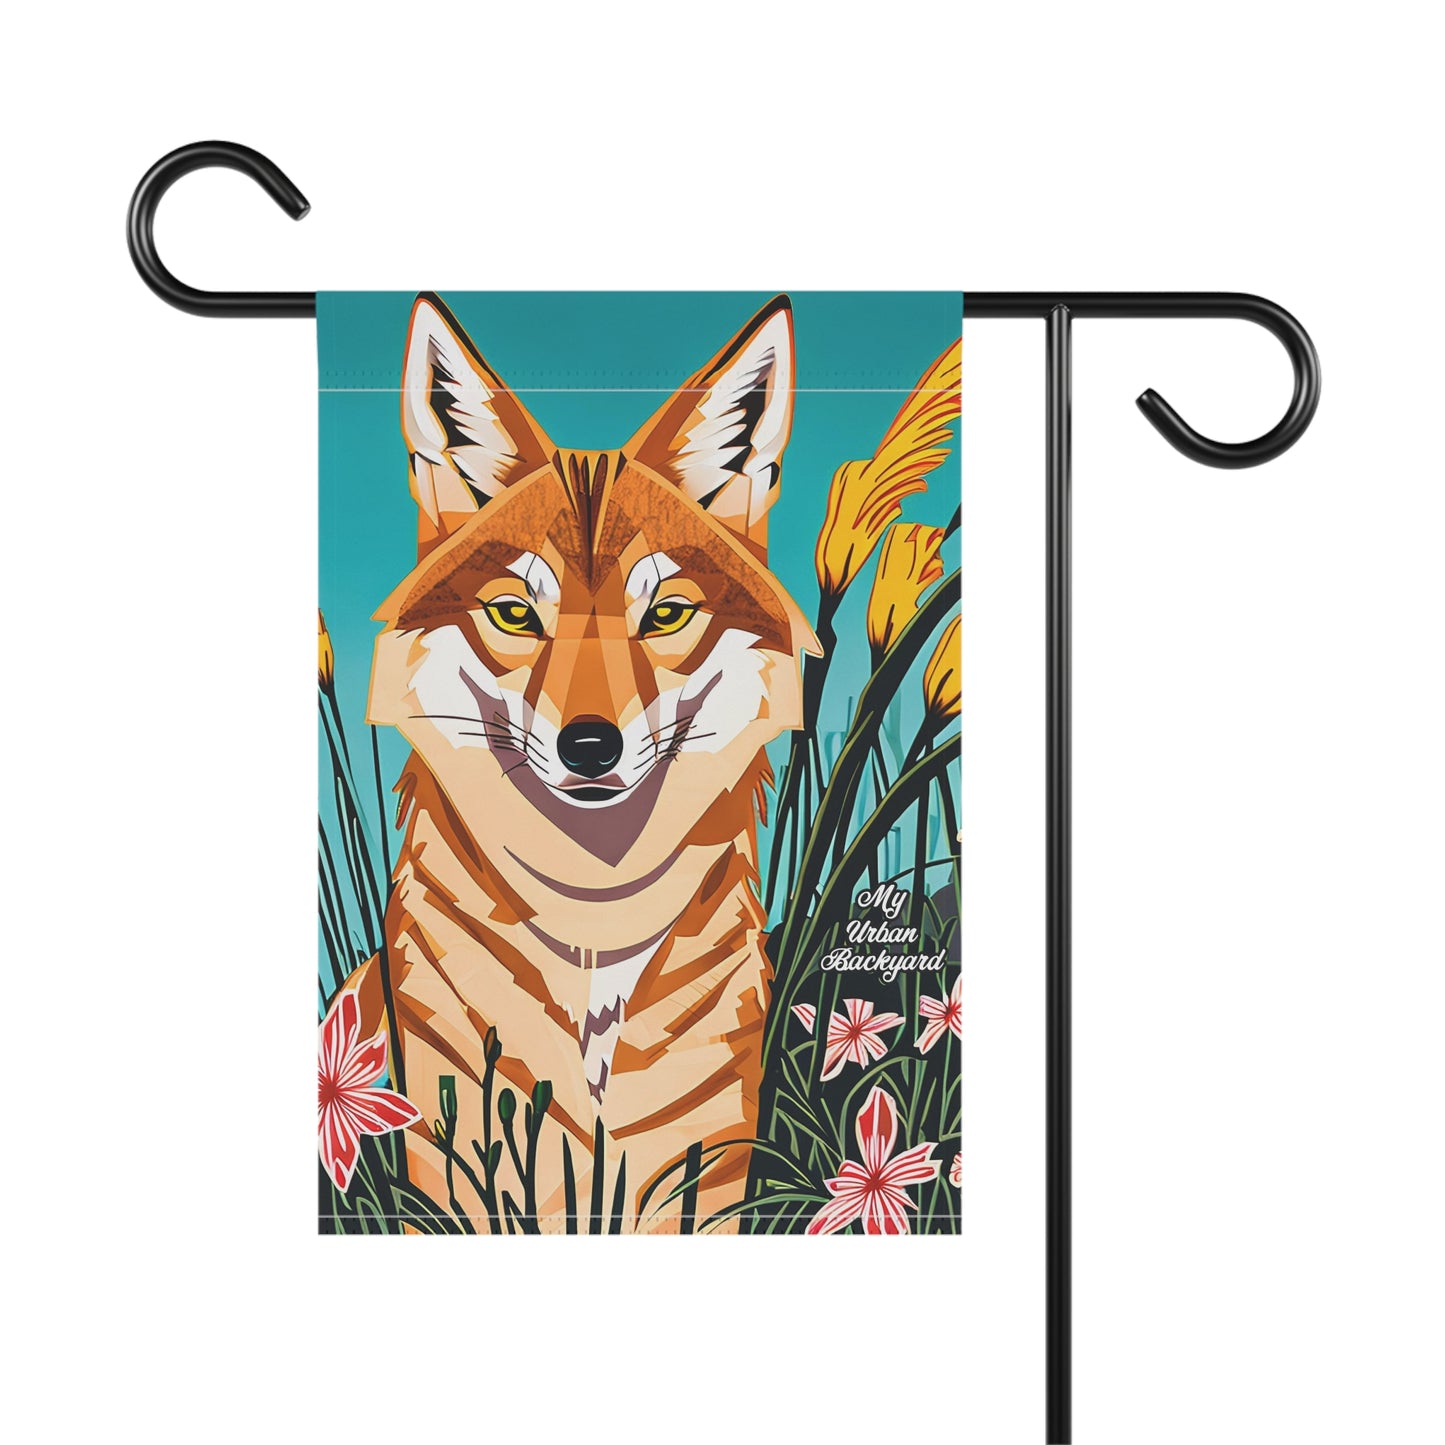 Coyote and Flowers, Garden Flag for Yard, Patio, Porch, or Work, 12"x18" - Flag only